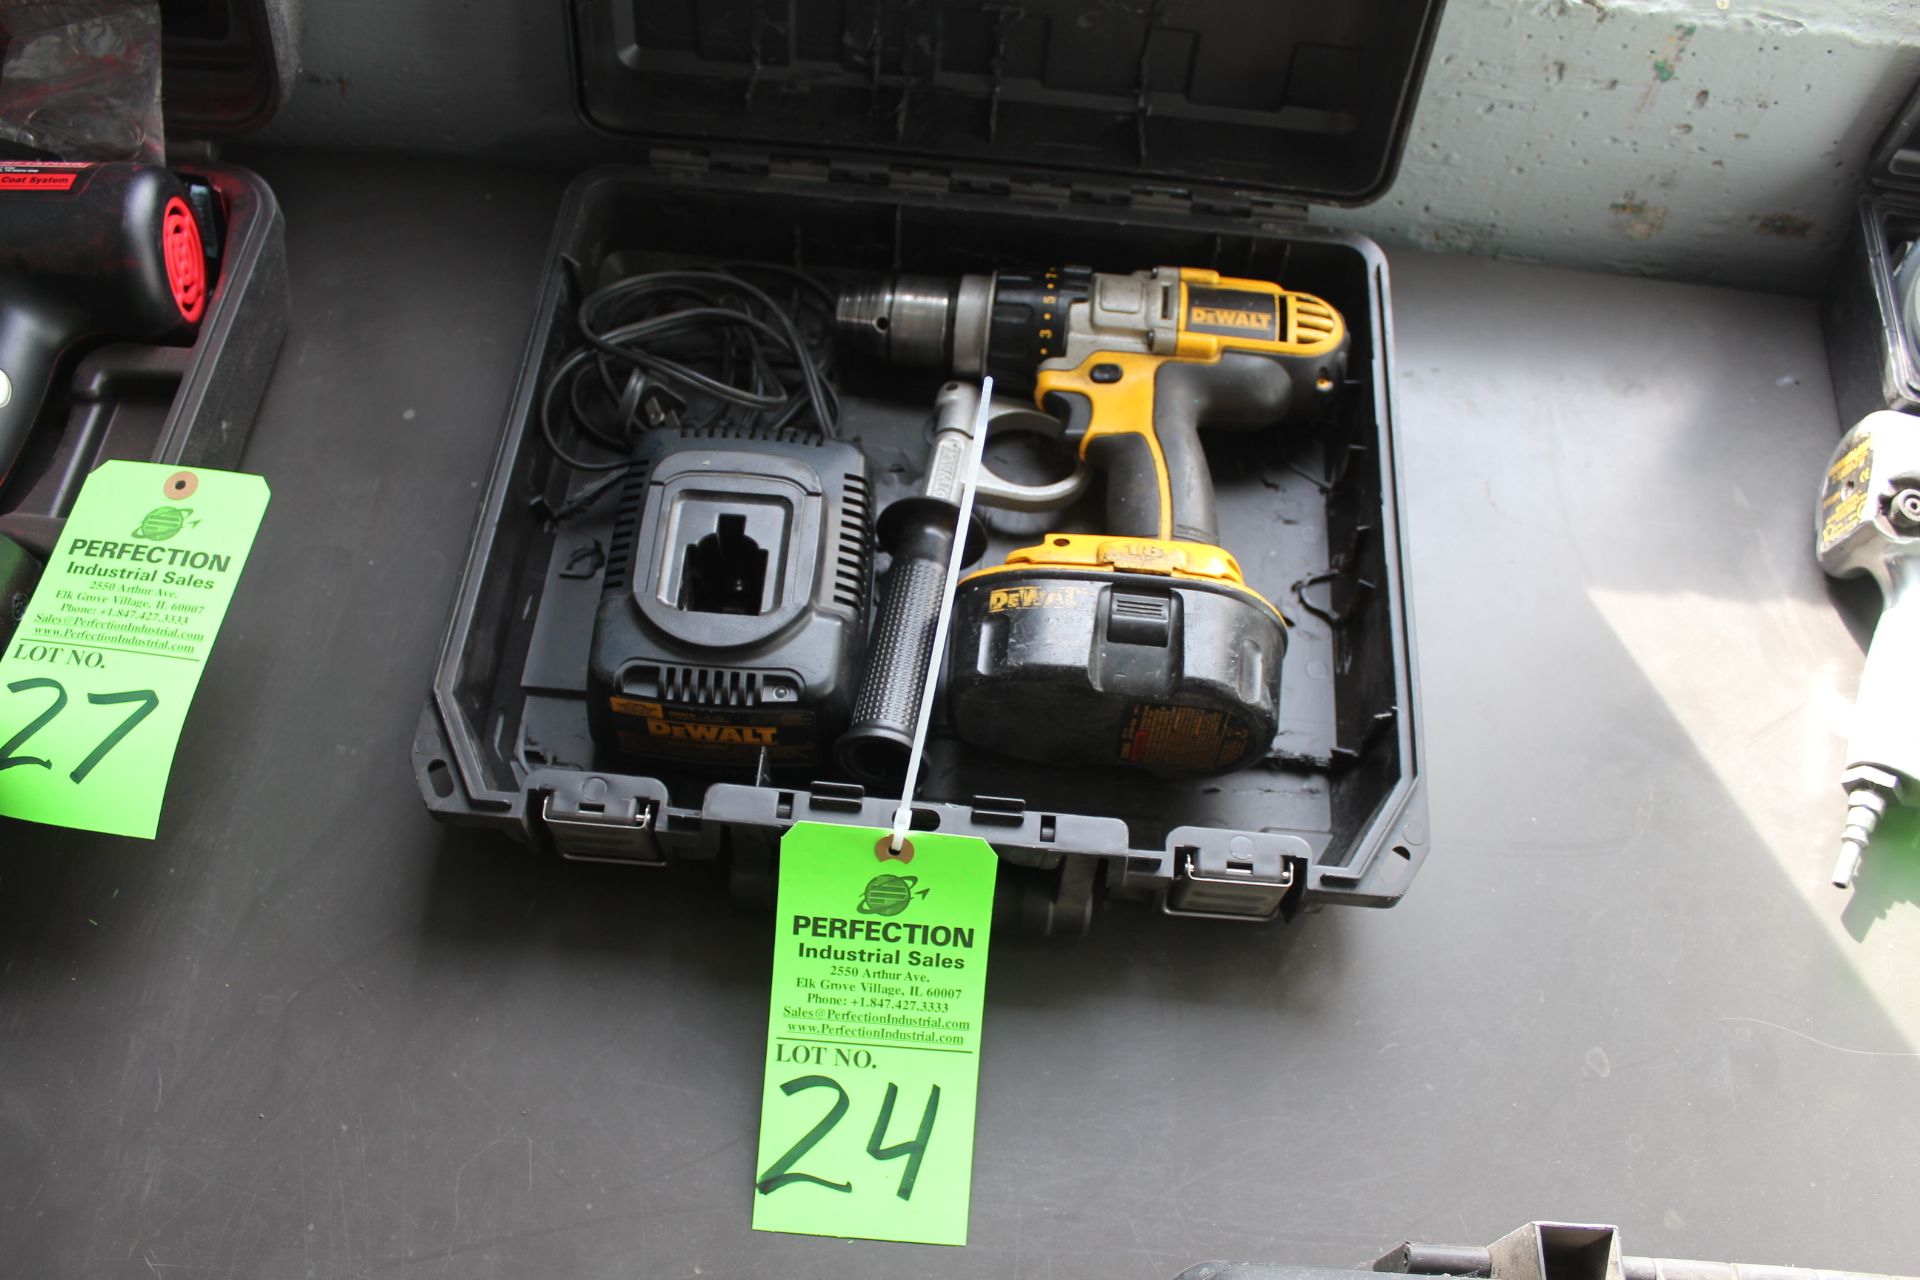 DeWalt 18 Volt 1/2" Cordless Drill Driver / Hammer Drill w/ Battery, Charger, & Case - Image 2 of 2